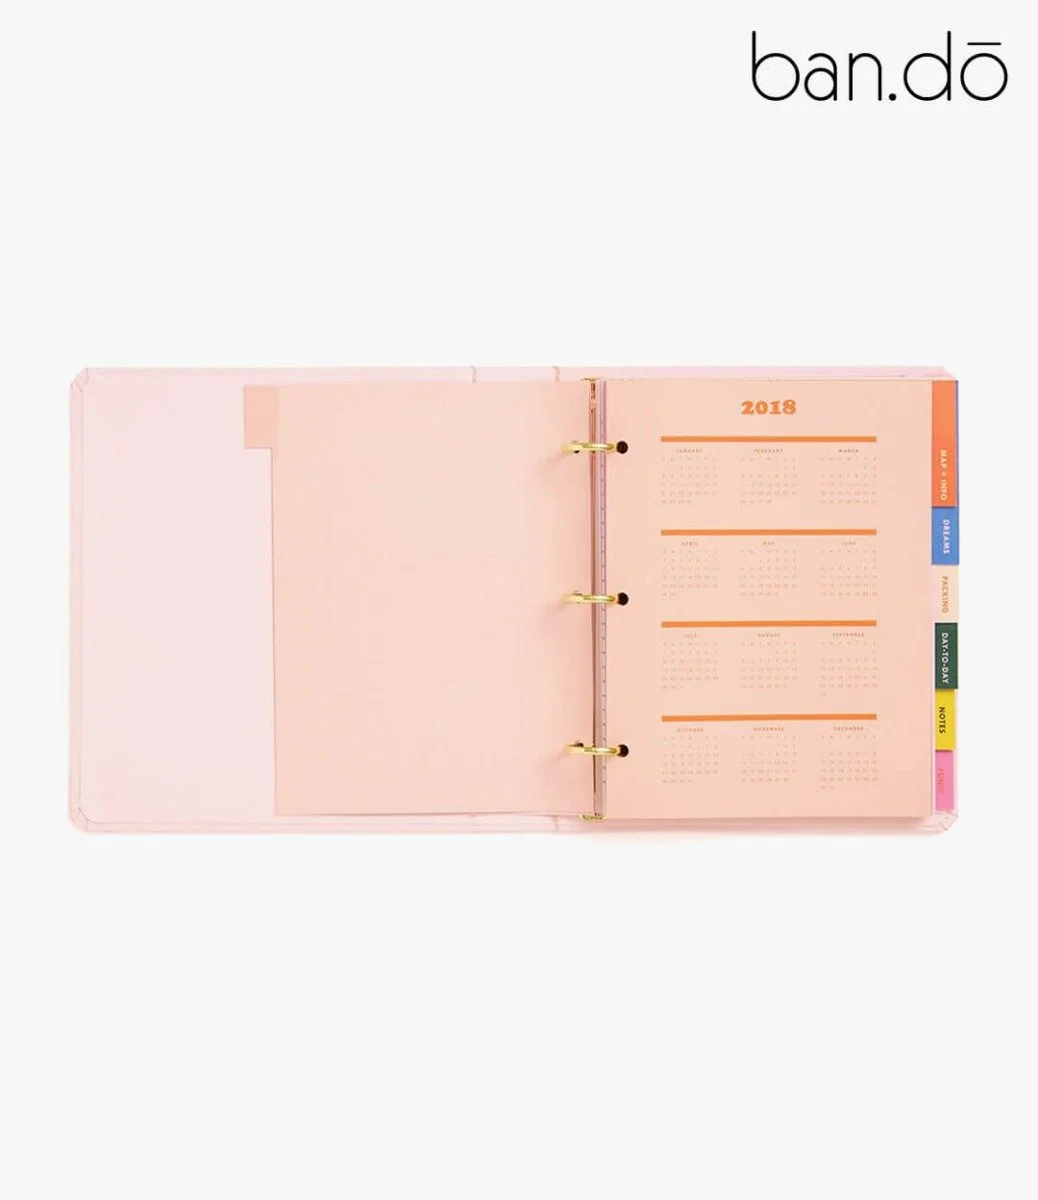 Paradiso Travel Planner by Ban.do